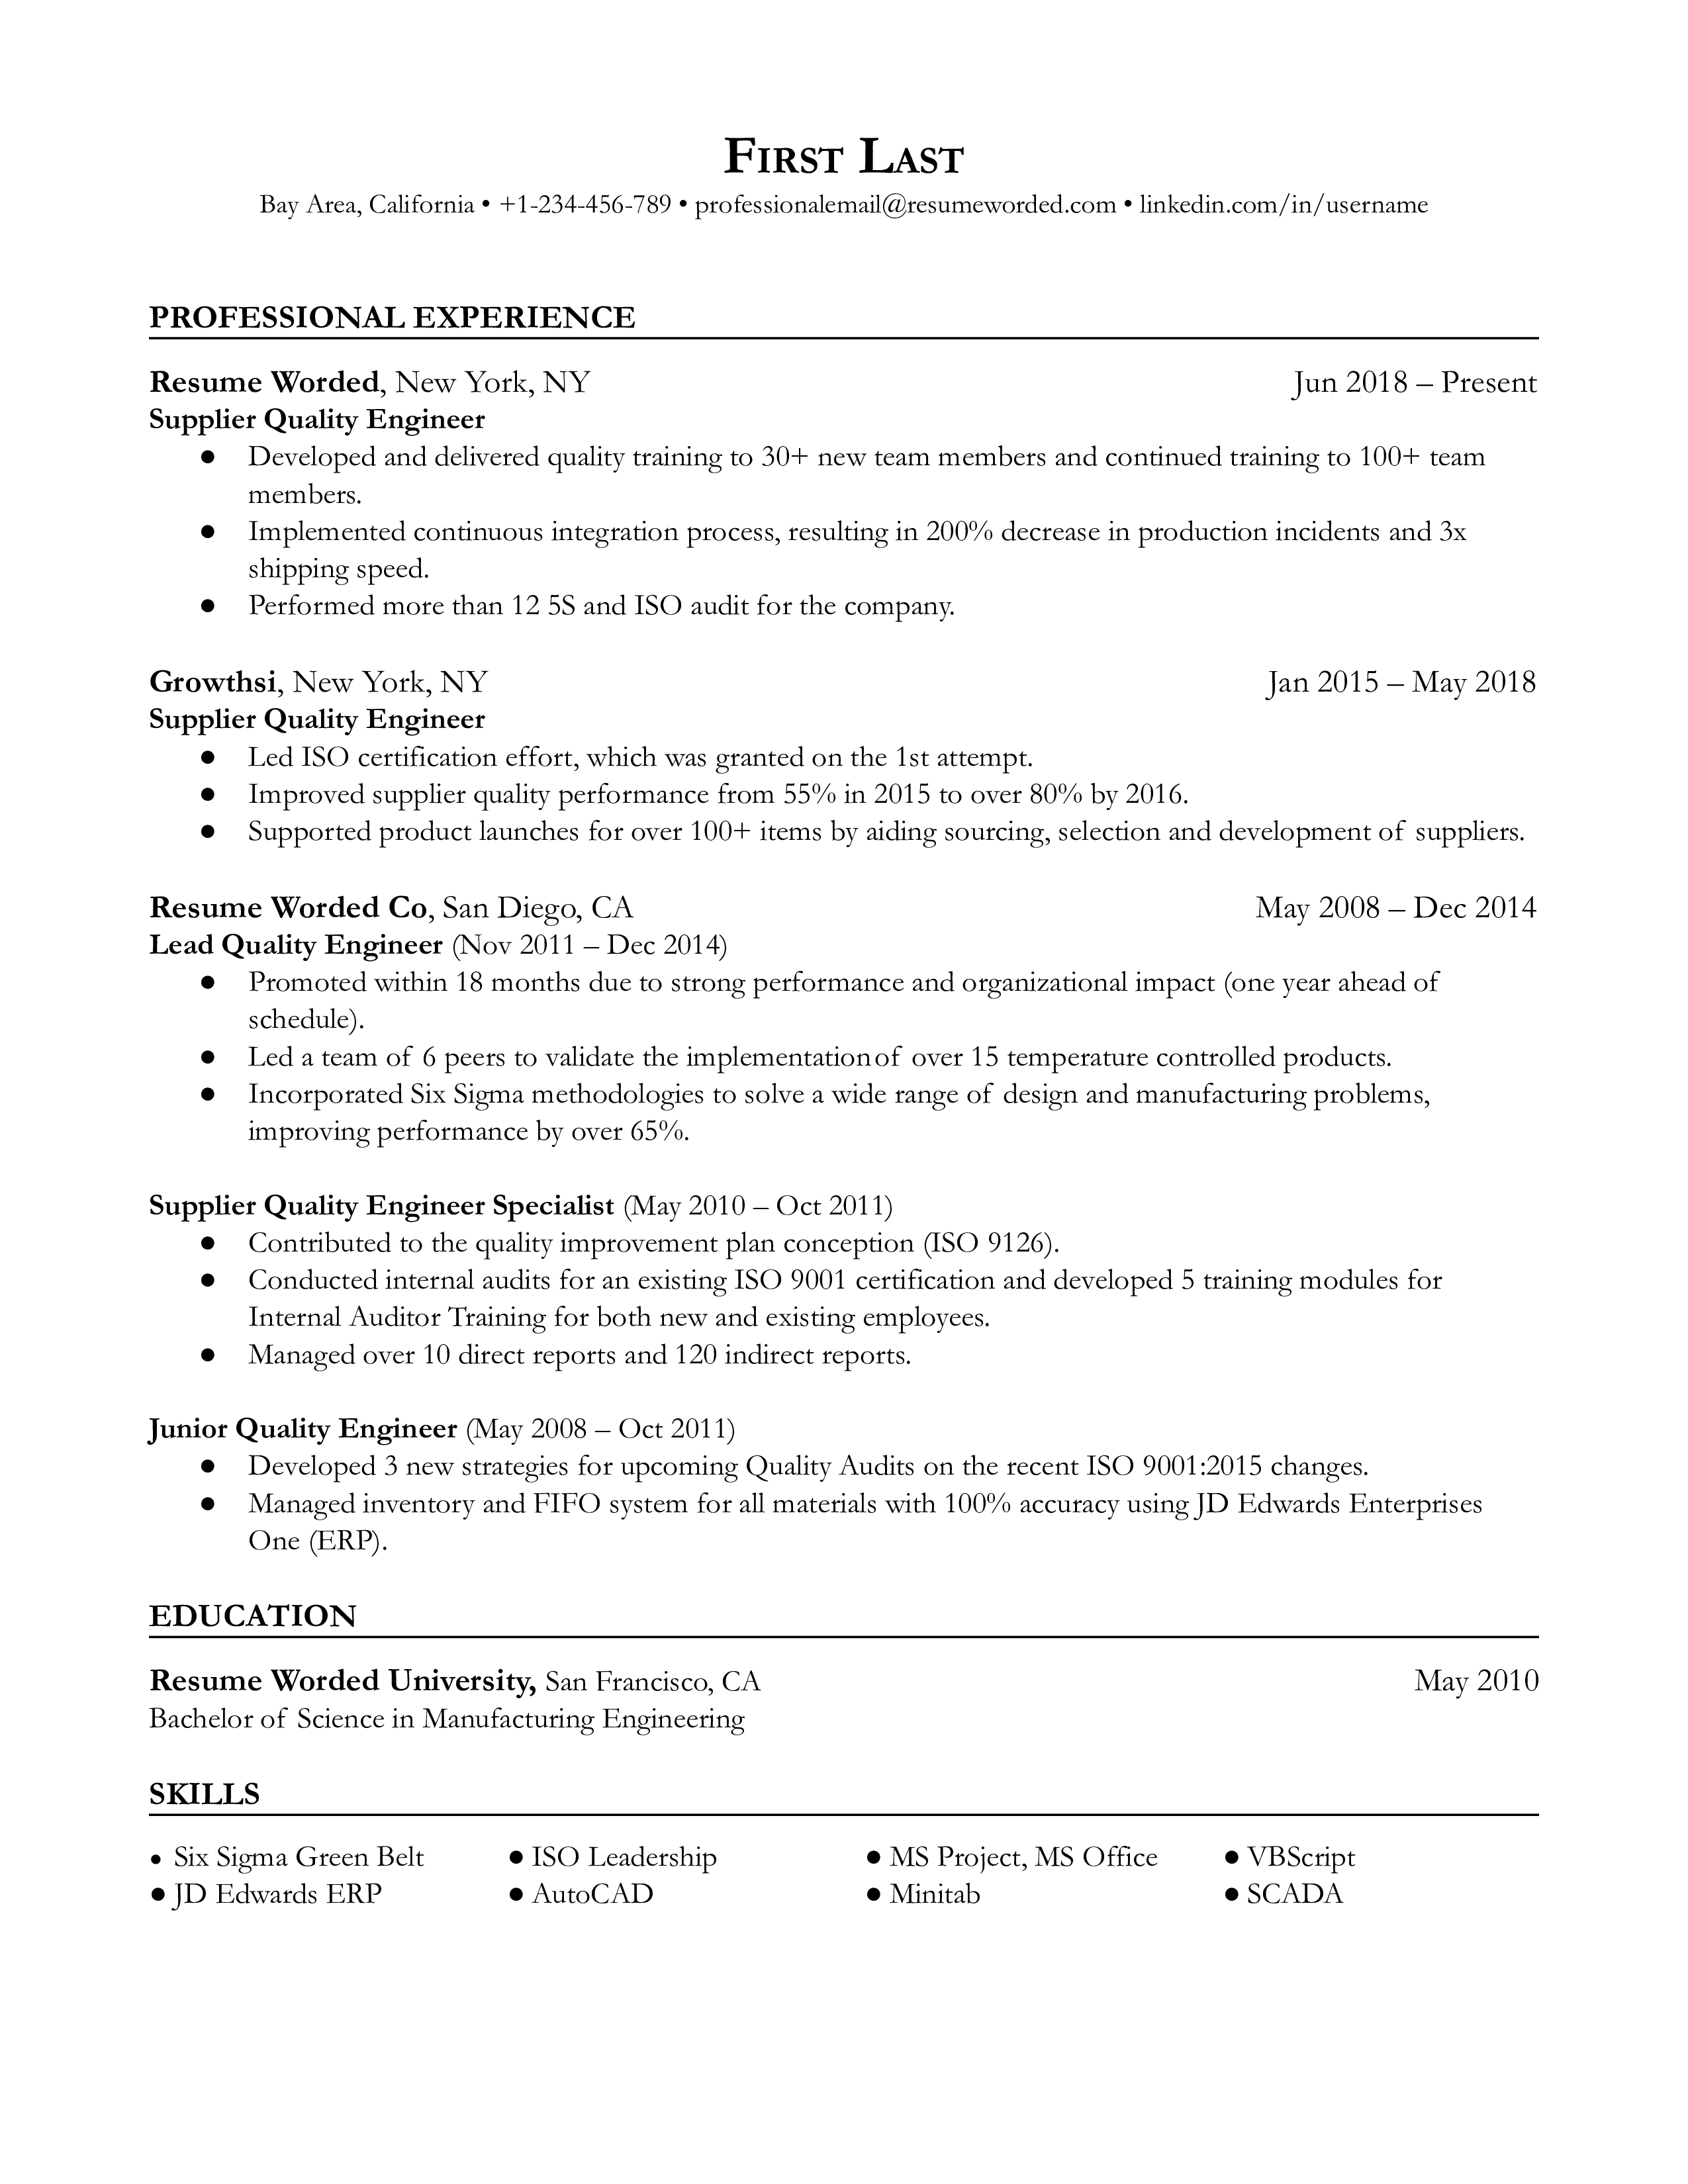 Supplier Quality Engineer resume example in 2022 and tips and trends for job hunters